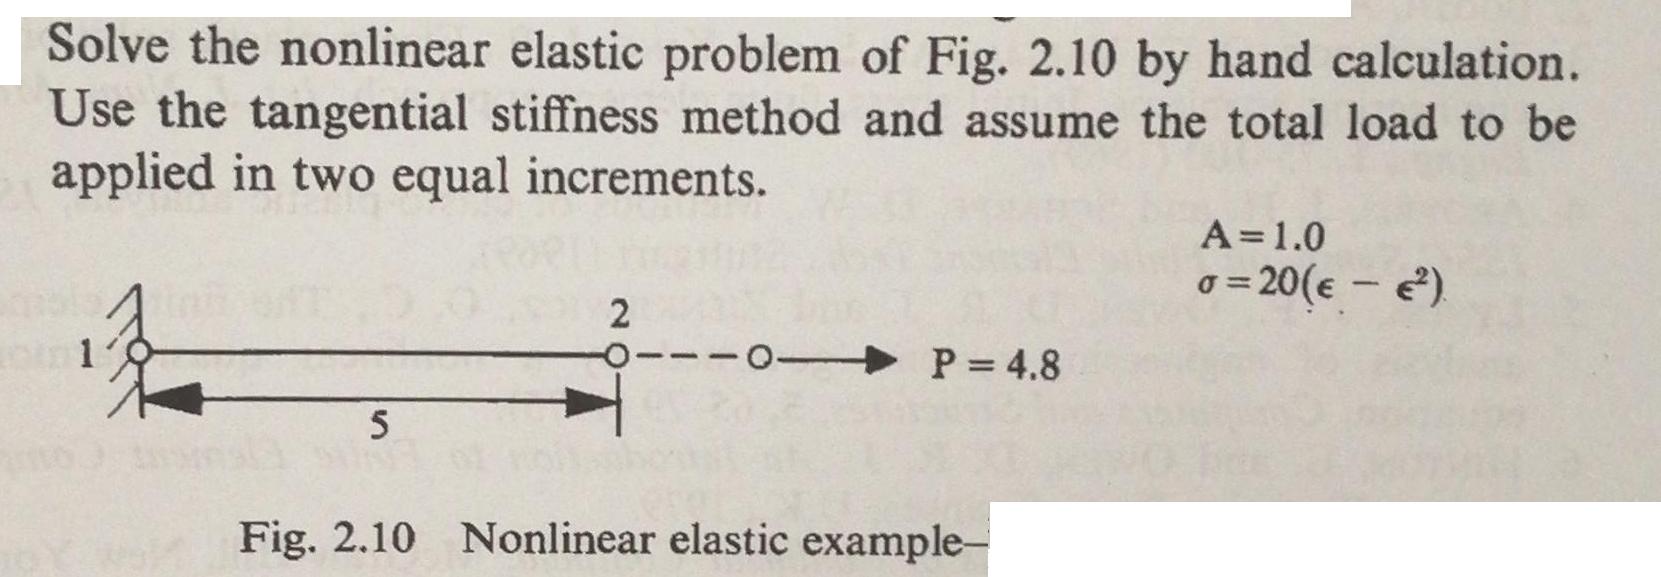 Solve the nonlinear elastic problem of Fig. 2.10 by hand calculation. Use the tangential stiffness method and